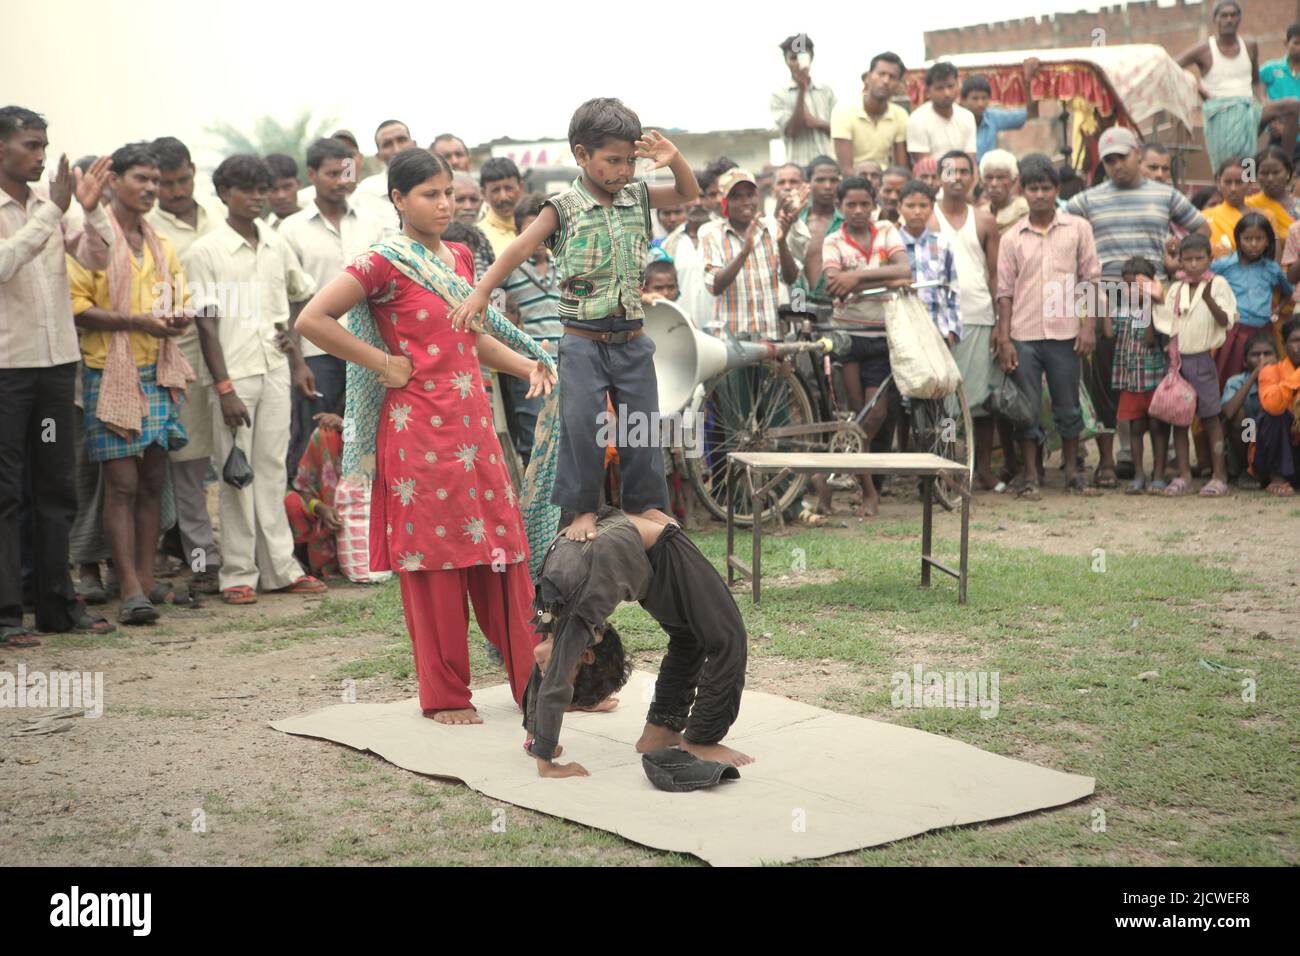 Children performing a gymnastic stunt in front of tens of spectators on a roadside field on the outskirts of Rajgir in Bihar, India. Stock Photo